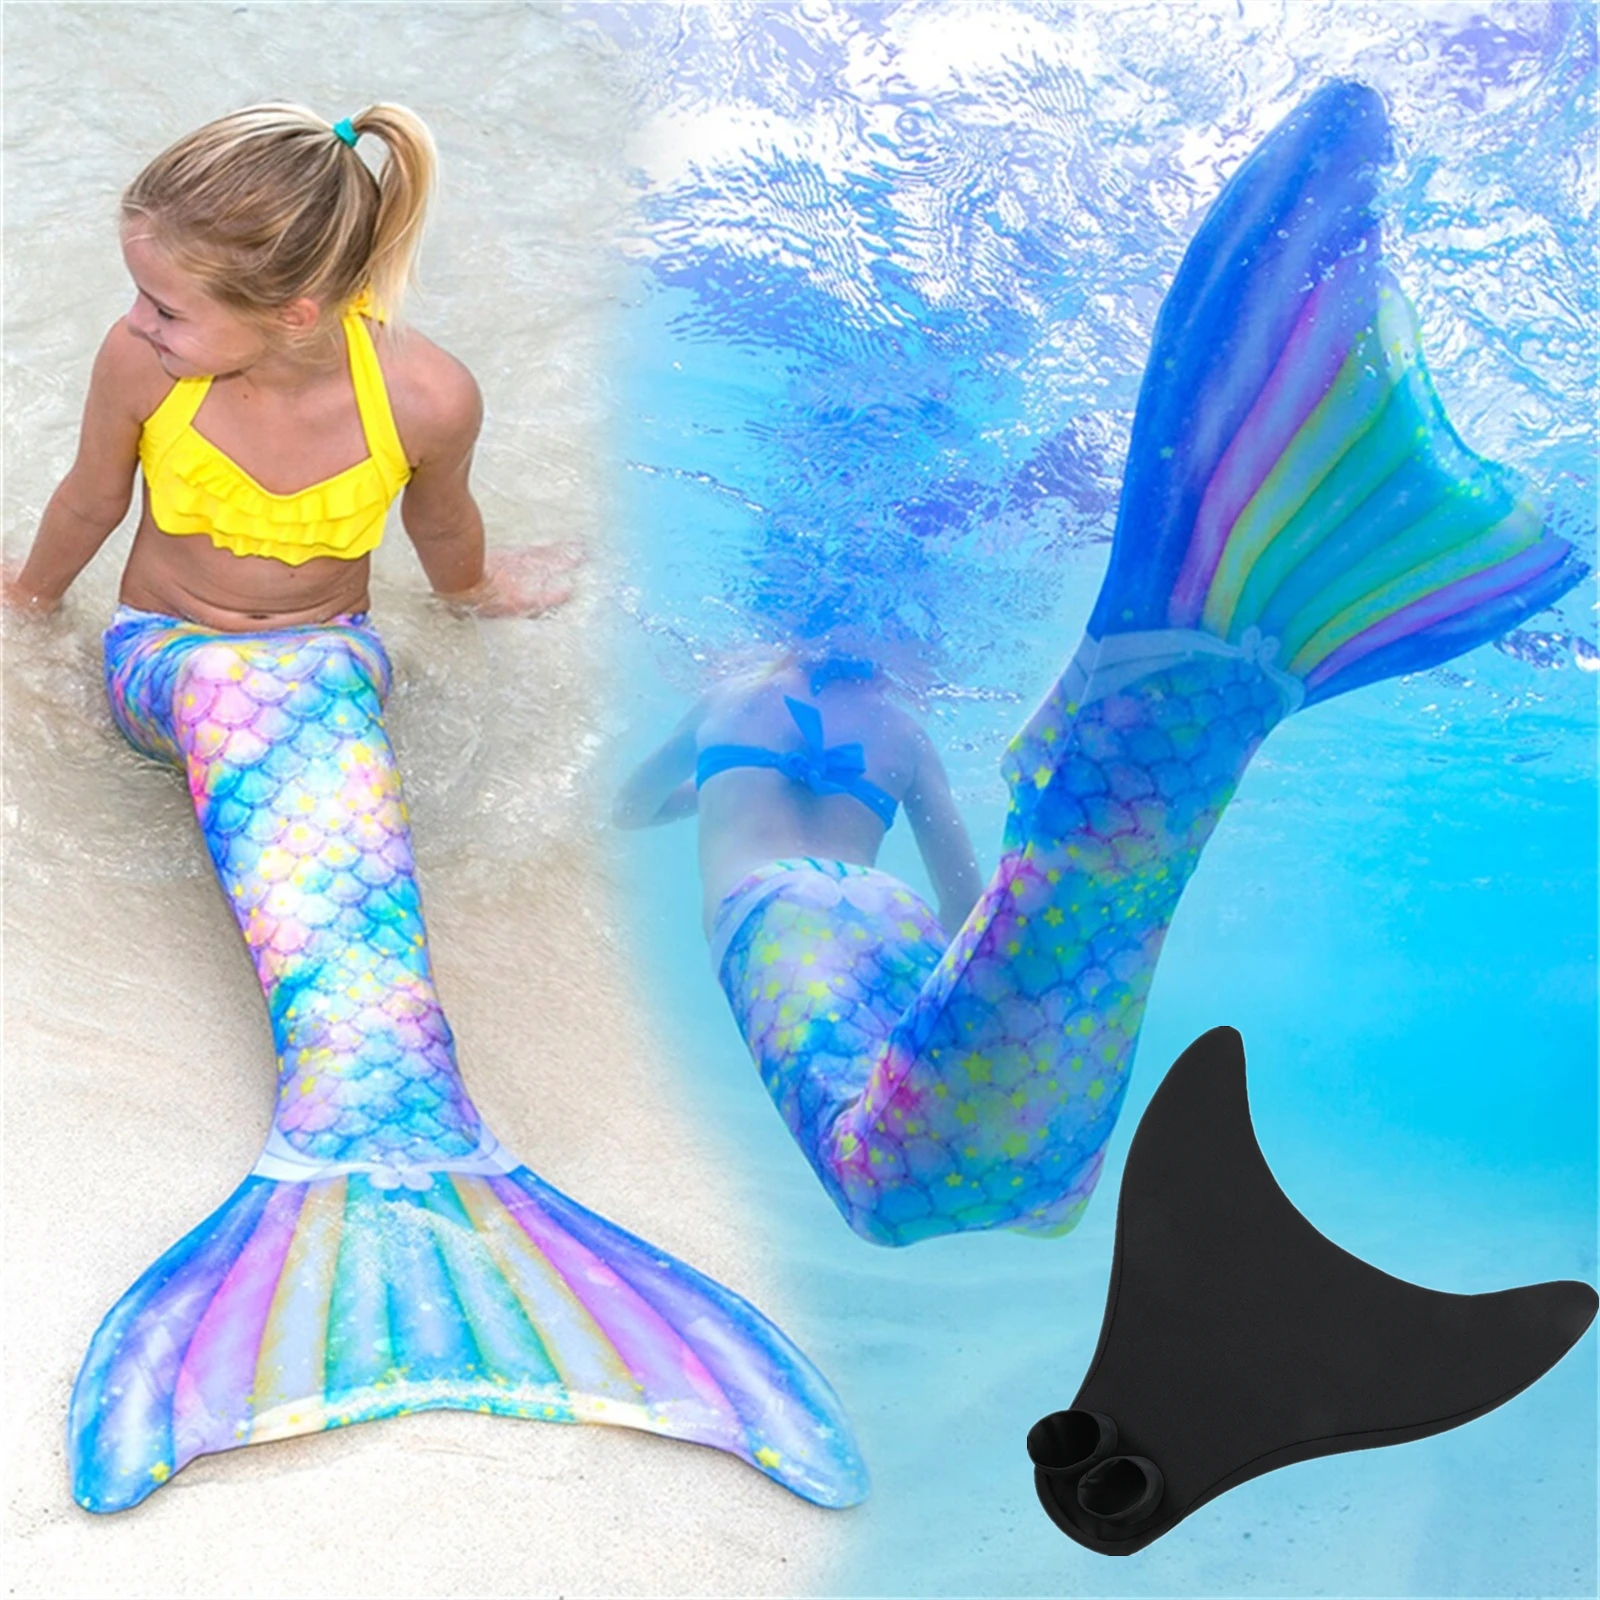 Mermaid Tails Pro Fin Monofin Flipper grils kids boys New cosplay Gift 